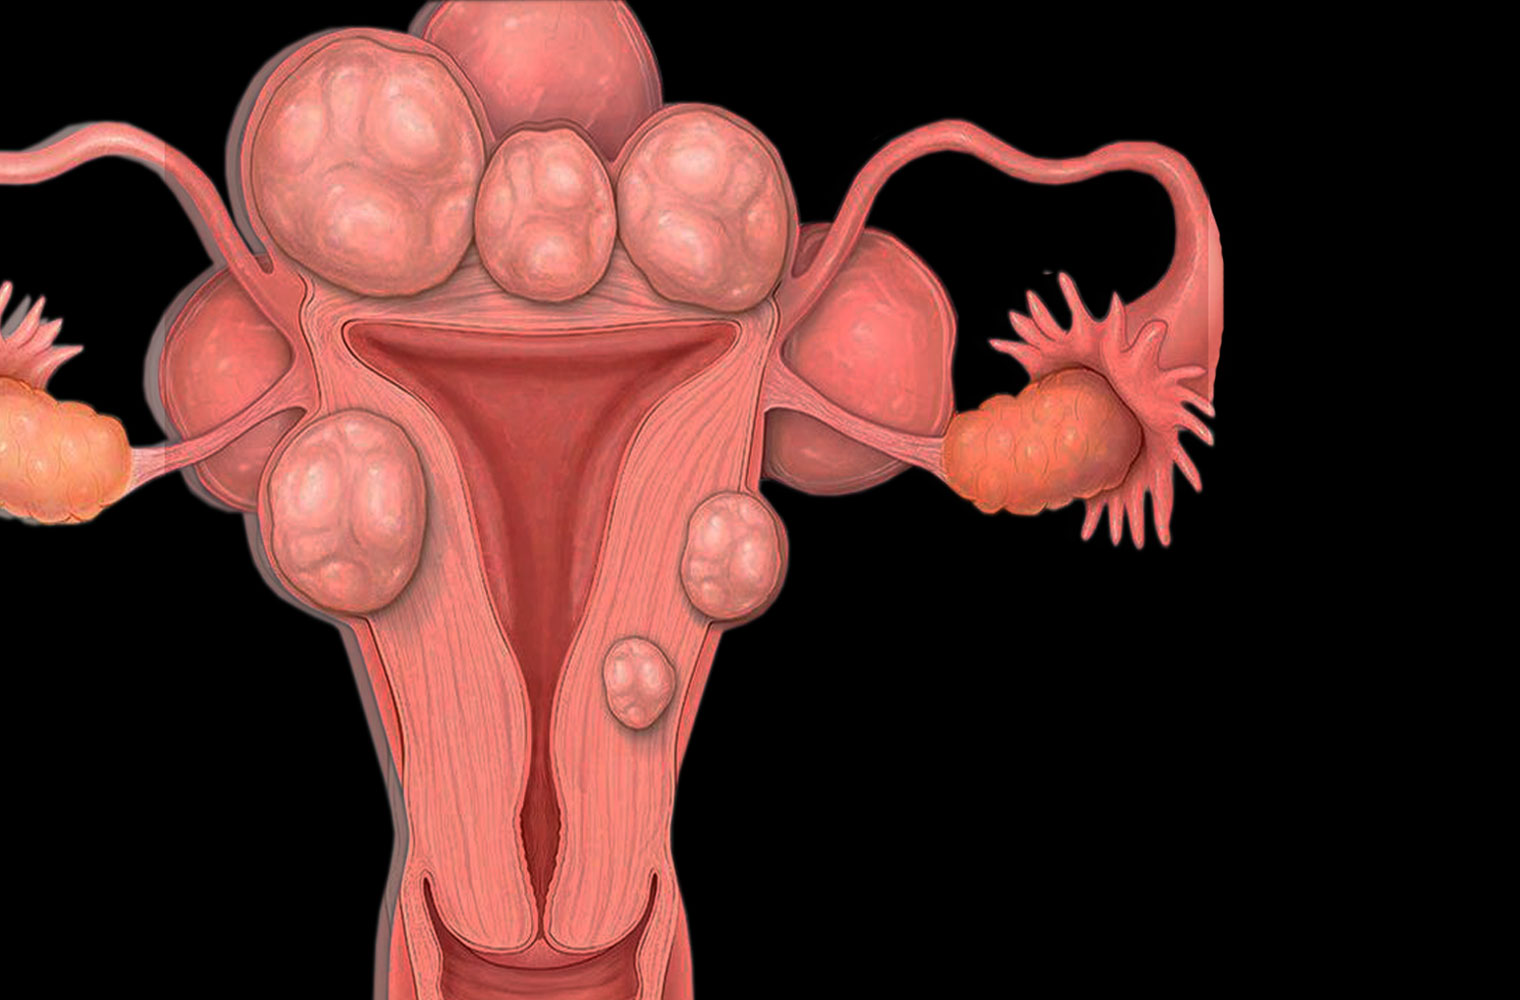 Is pregnancy possible with uterine fibroids